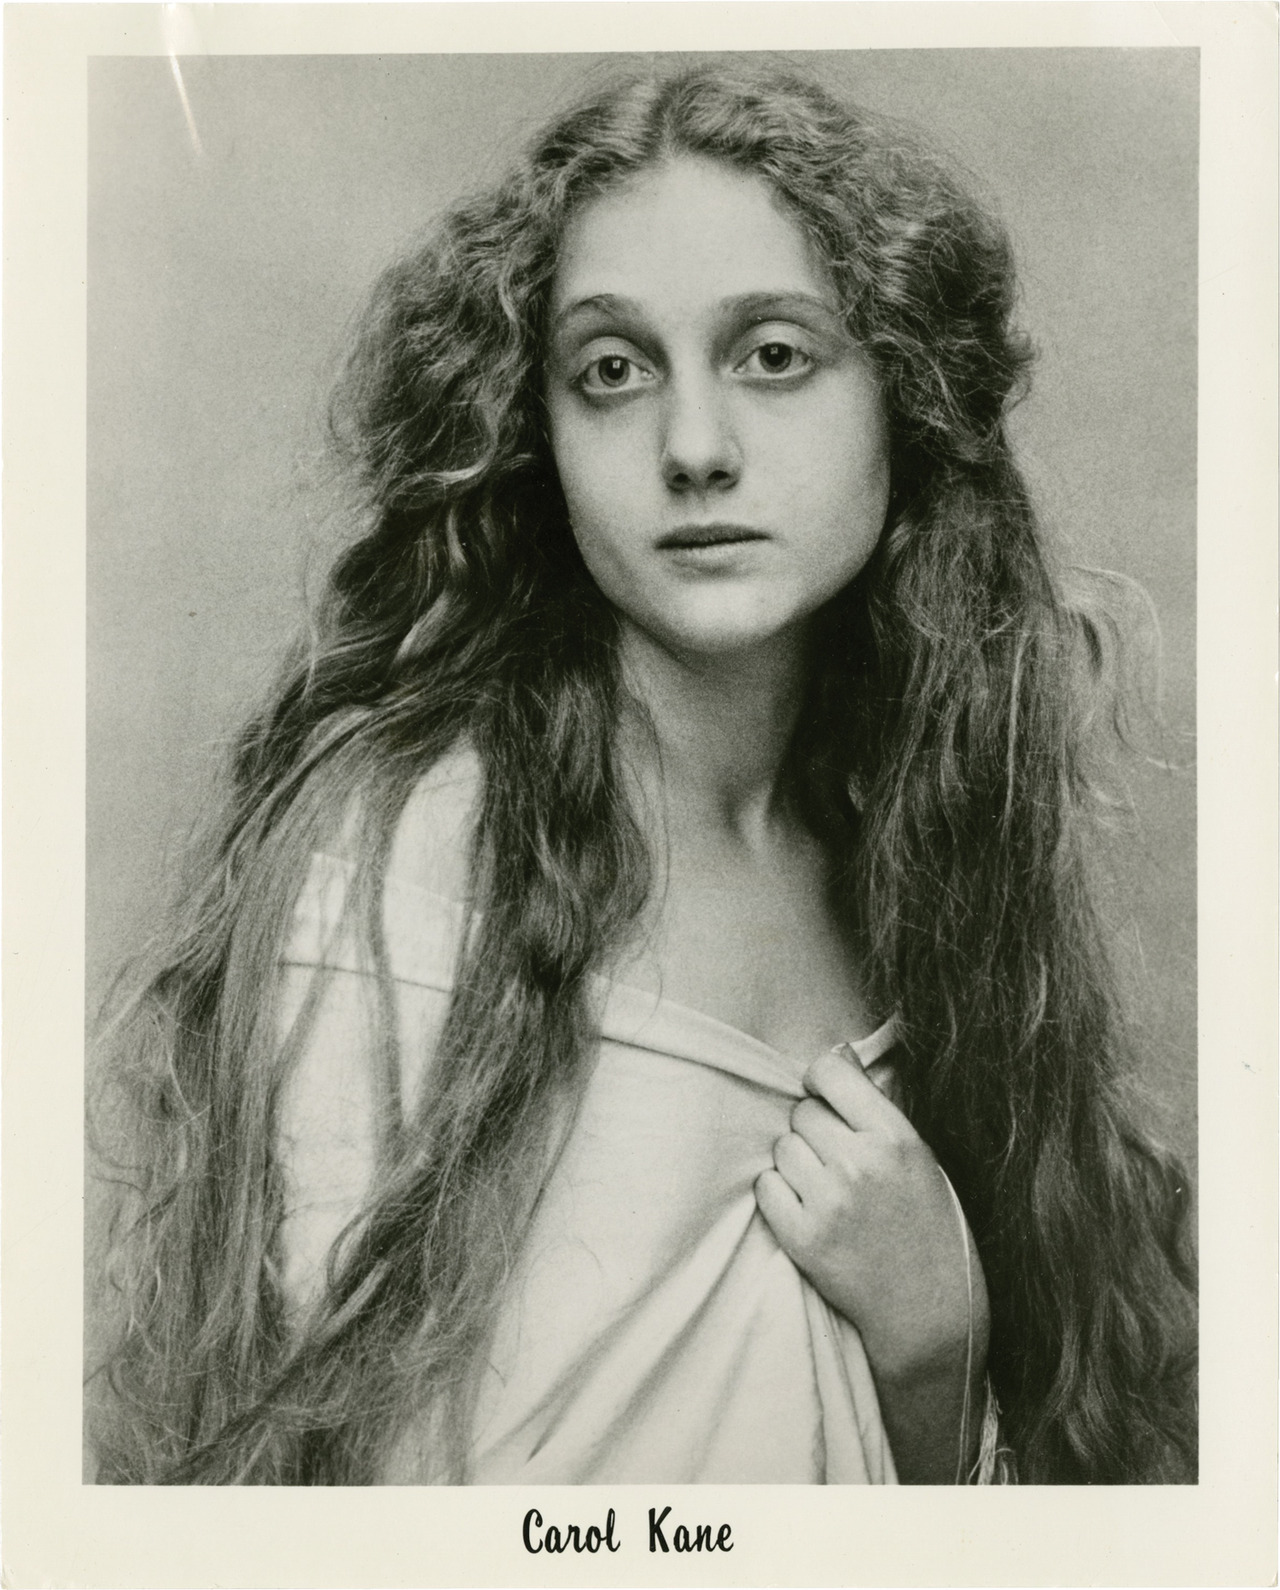 virginian-wolf-snake: Carol Kane, 1976 An agency memo on the verso of the first photograph